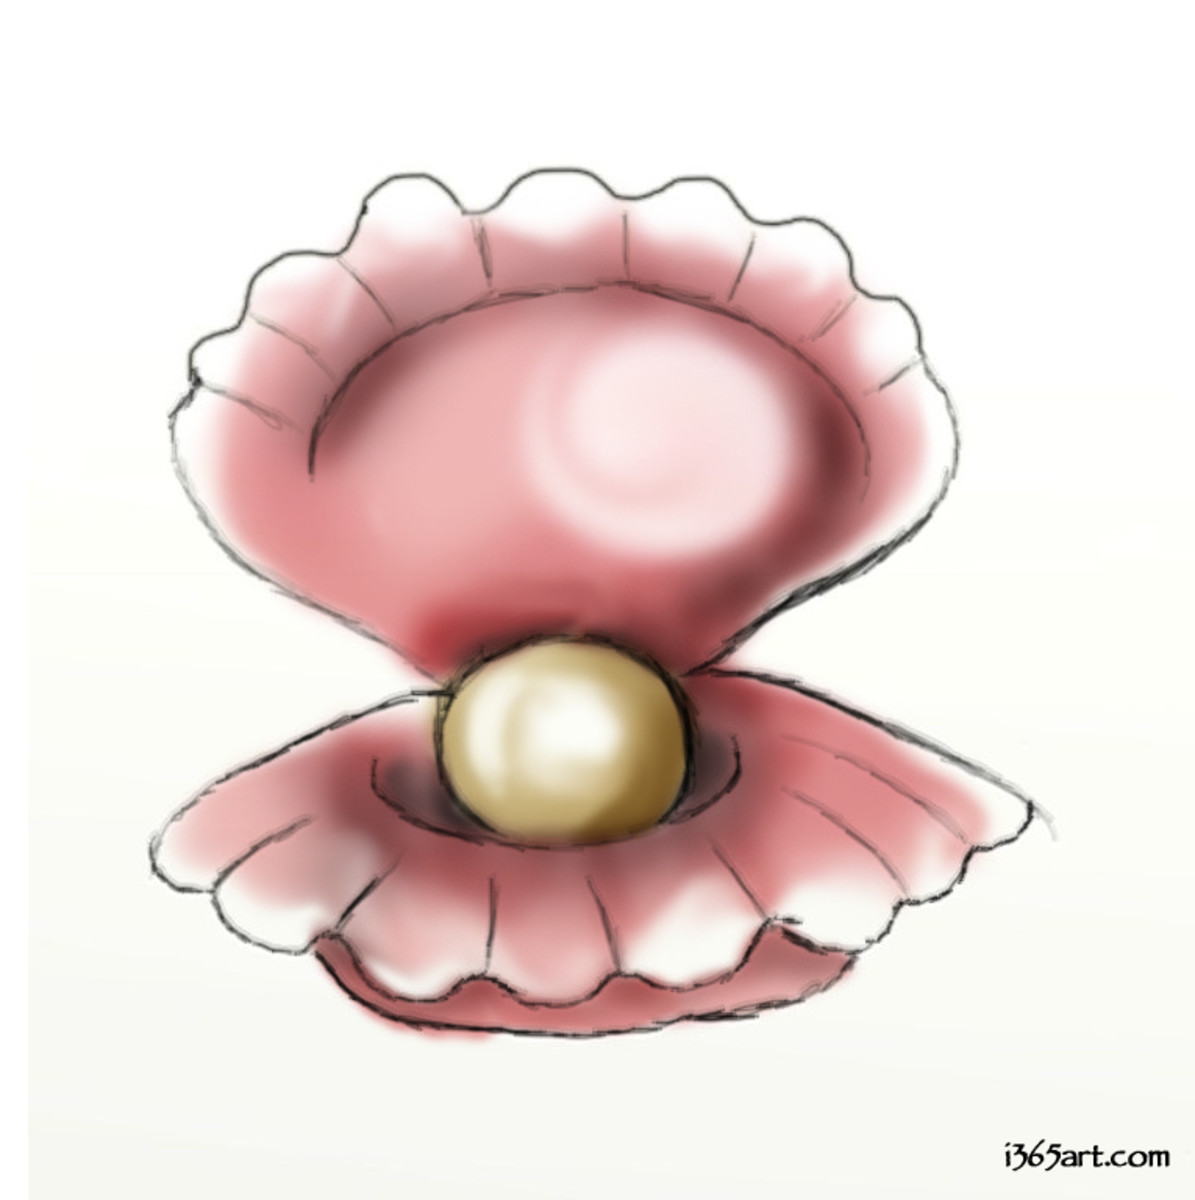 Learn how to draw this clam!